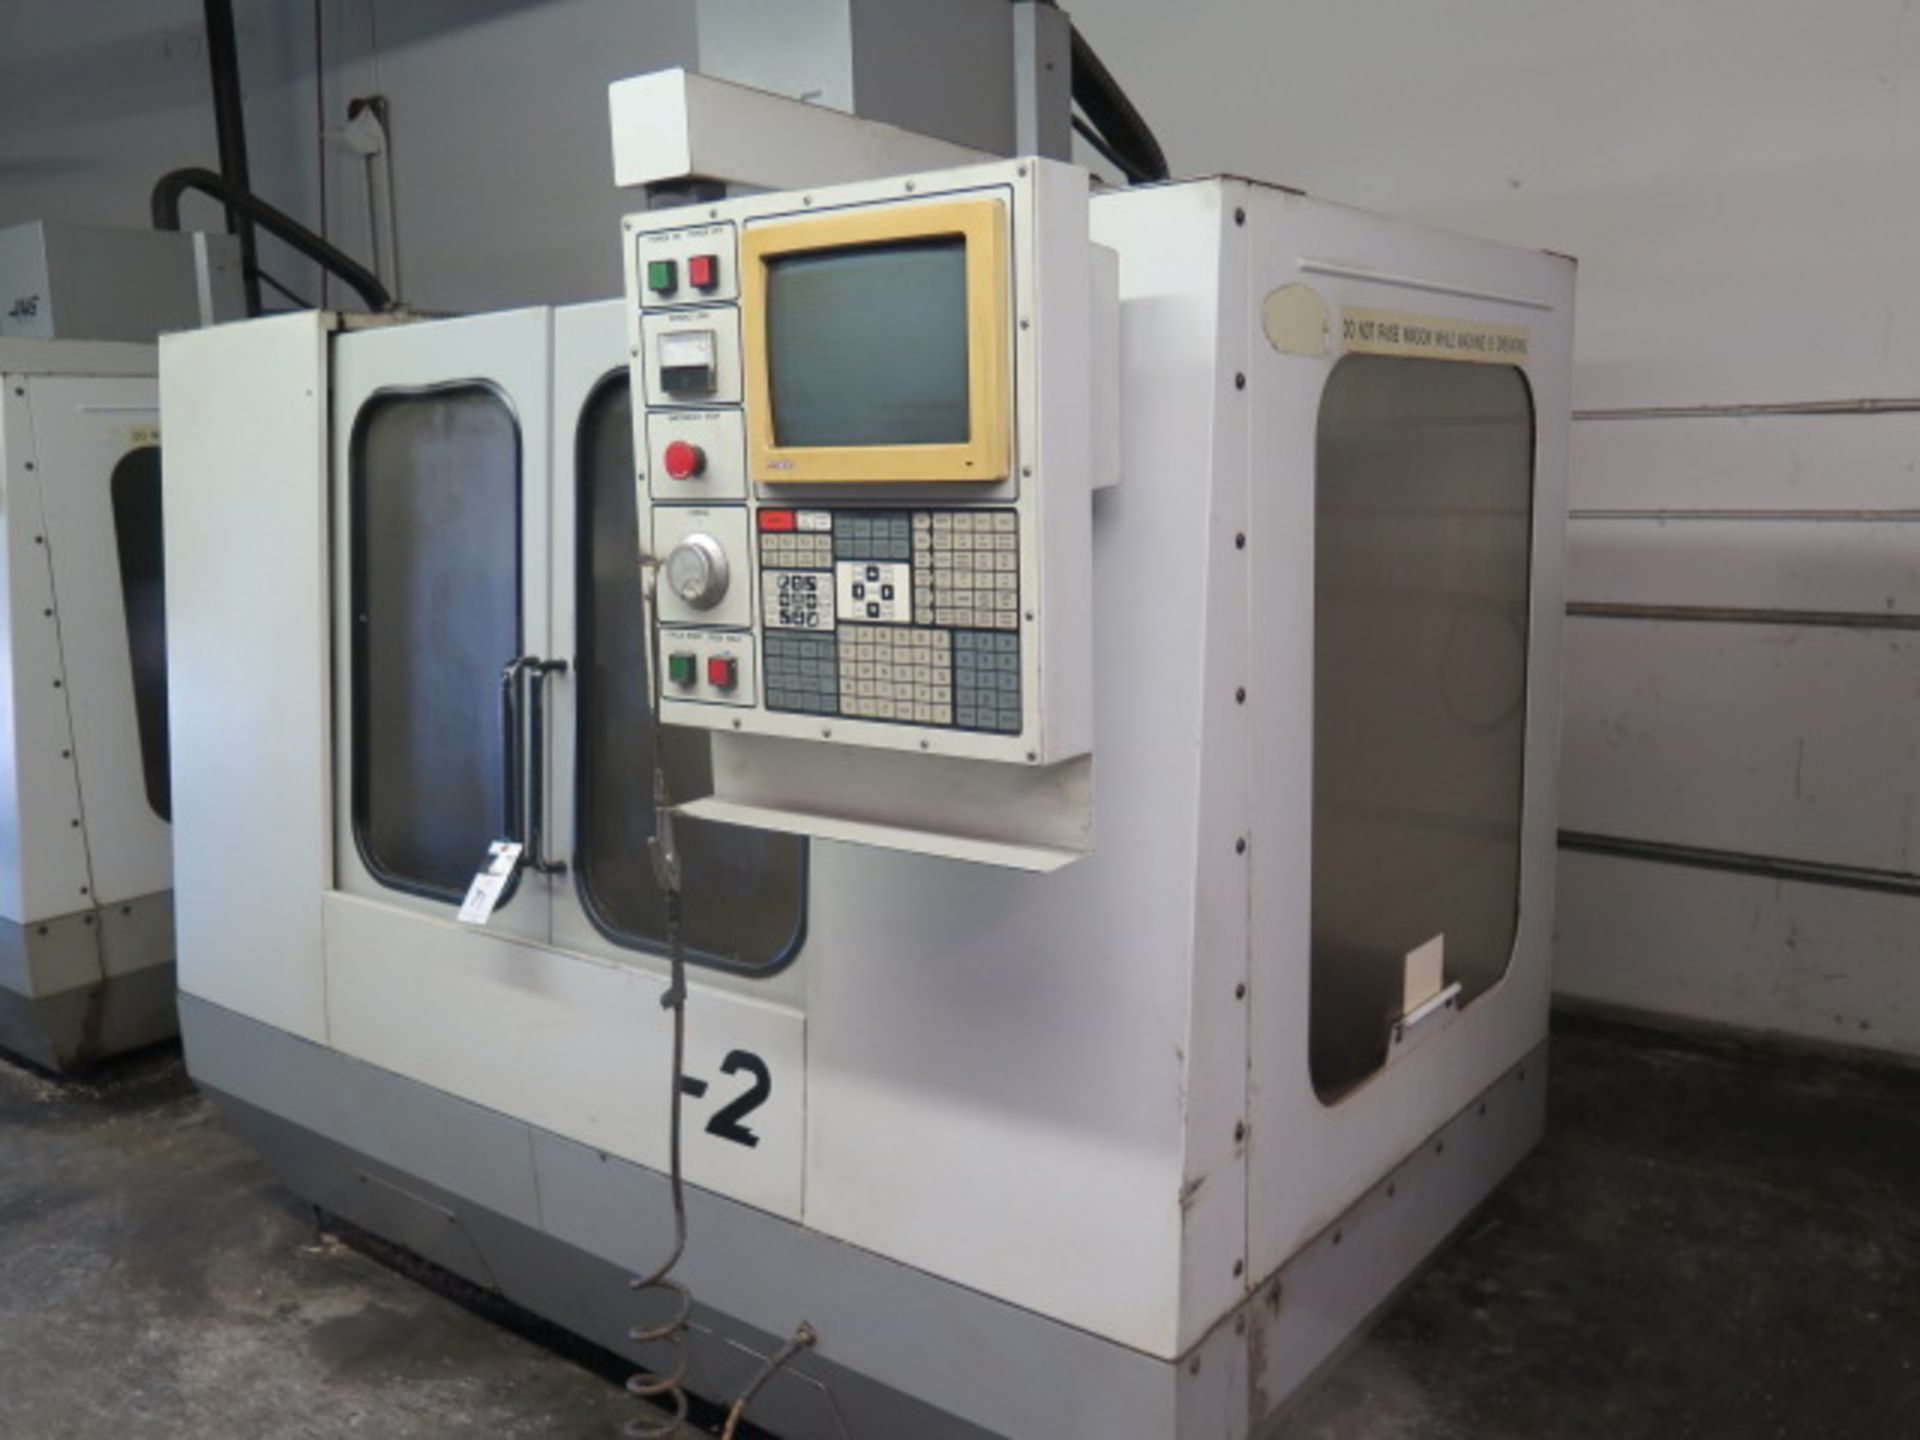 1994 Haas VF-2 CNC VMC, s/n 3258 w/ Haas Controls, 20-Station ATC, CAT-40 Taper, SOLD AS IS - Image 2 of 16